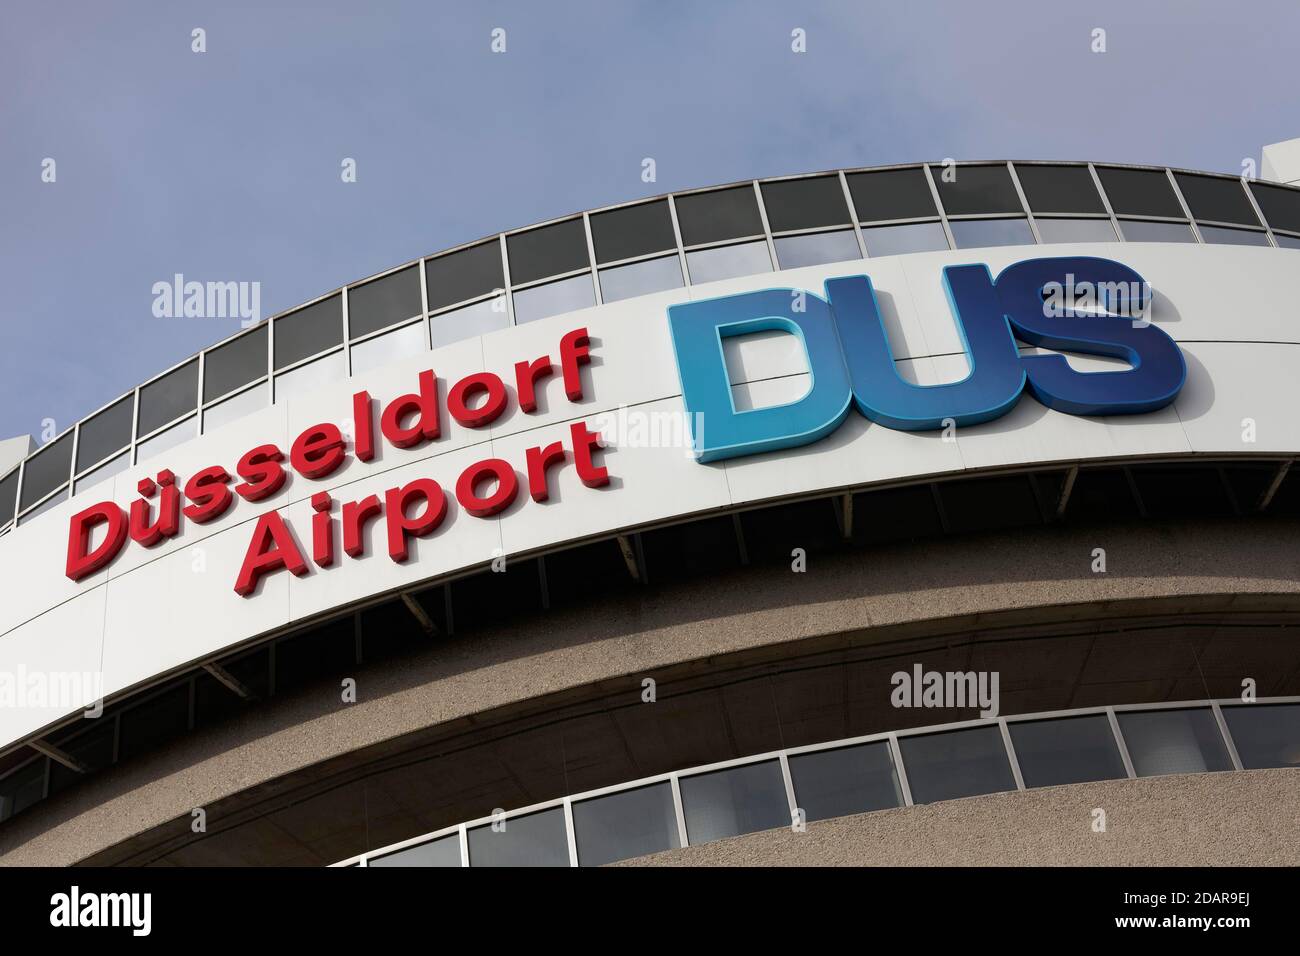 Duesseldorf Airport DUS, lettering at the airport, North Rhine-Westphalia, Germany Stock Photo